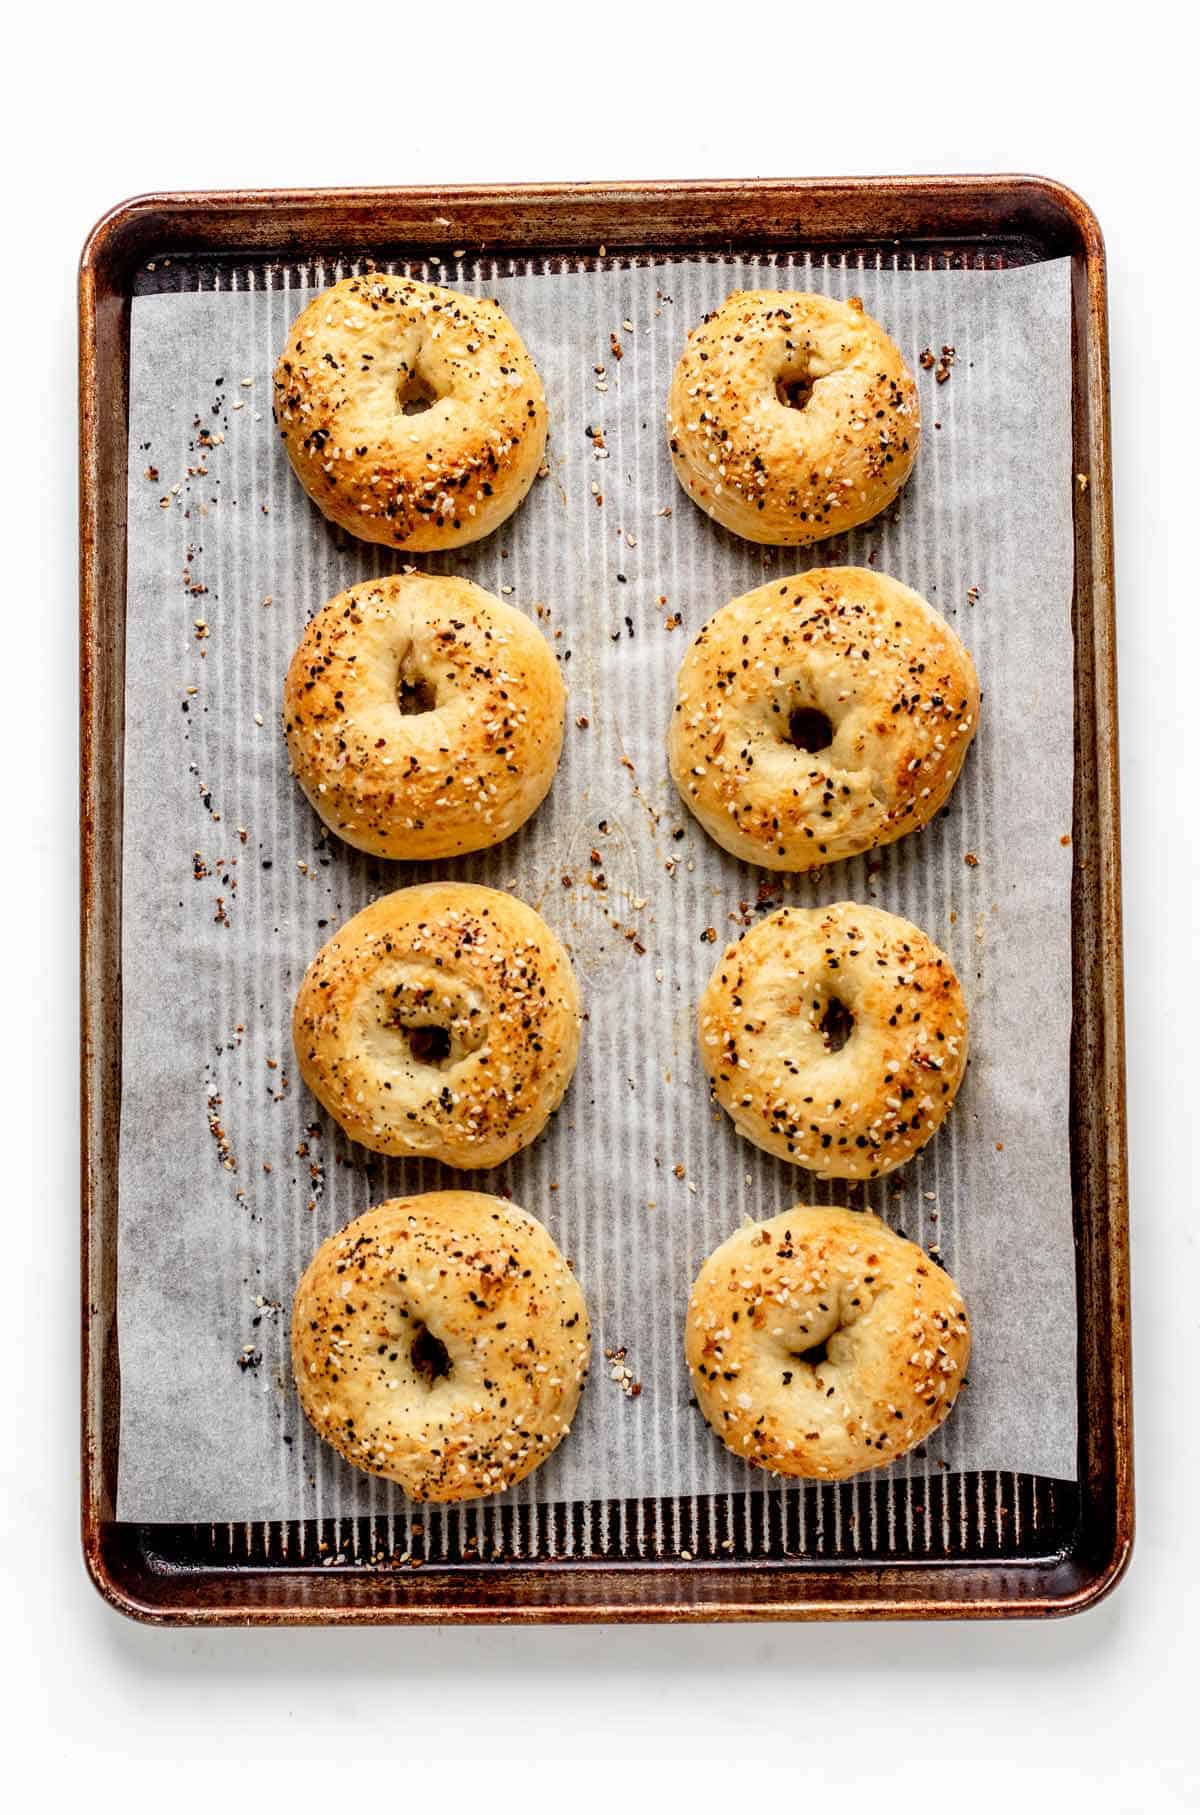 Bagels on a parchment paper lined baking sheet after cooking in the oven.